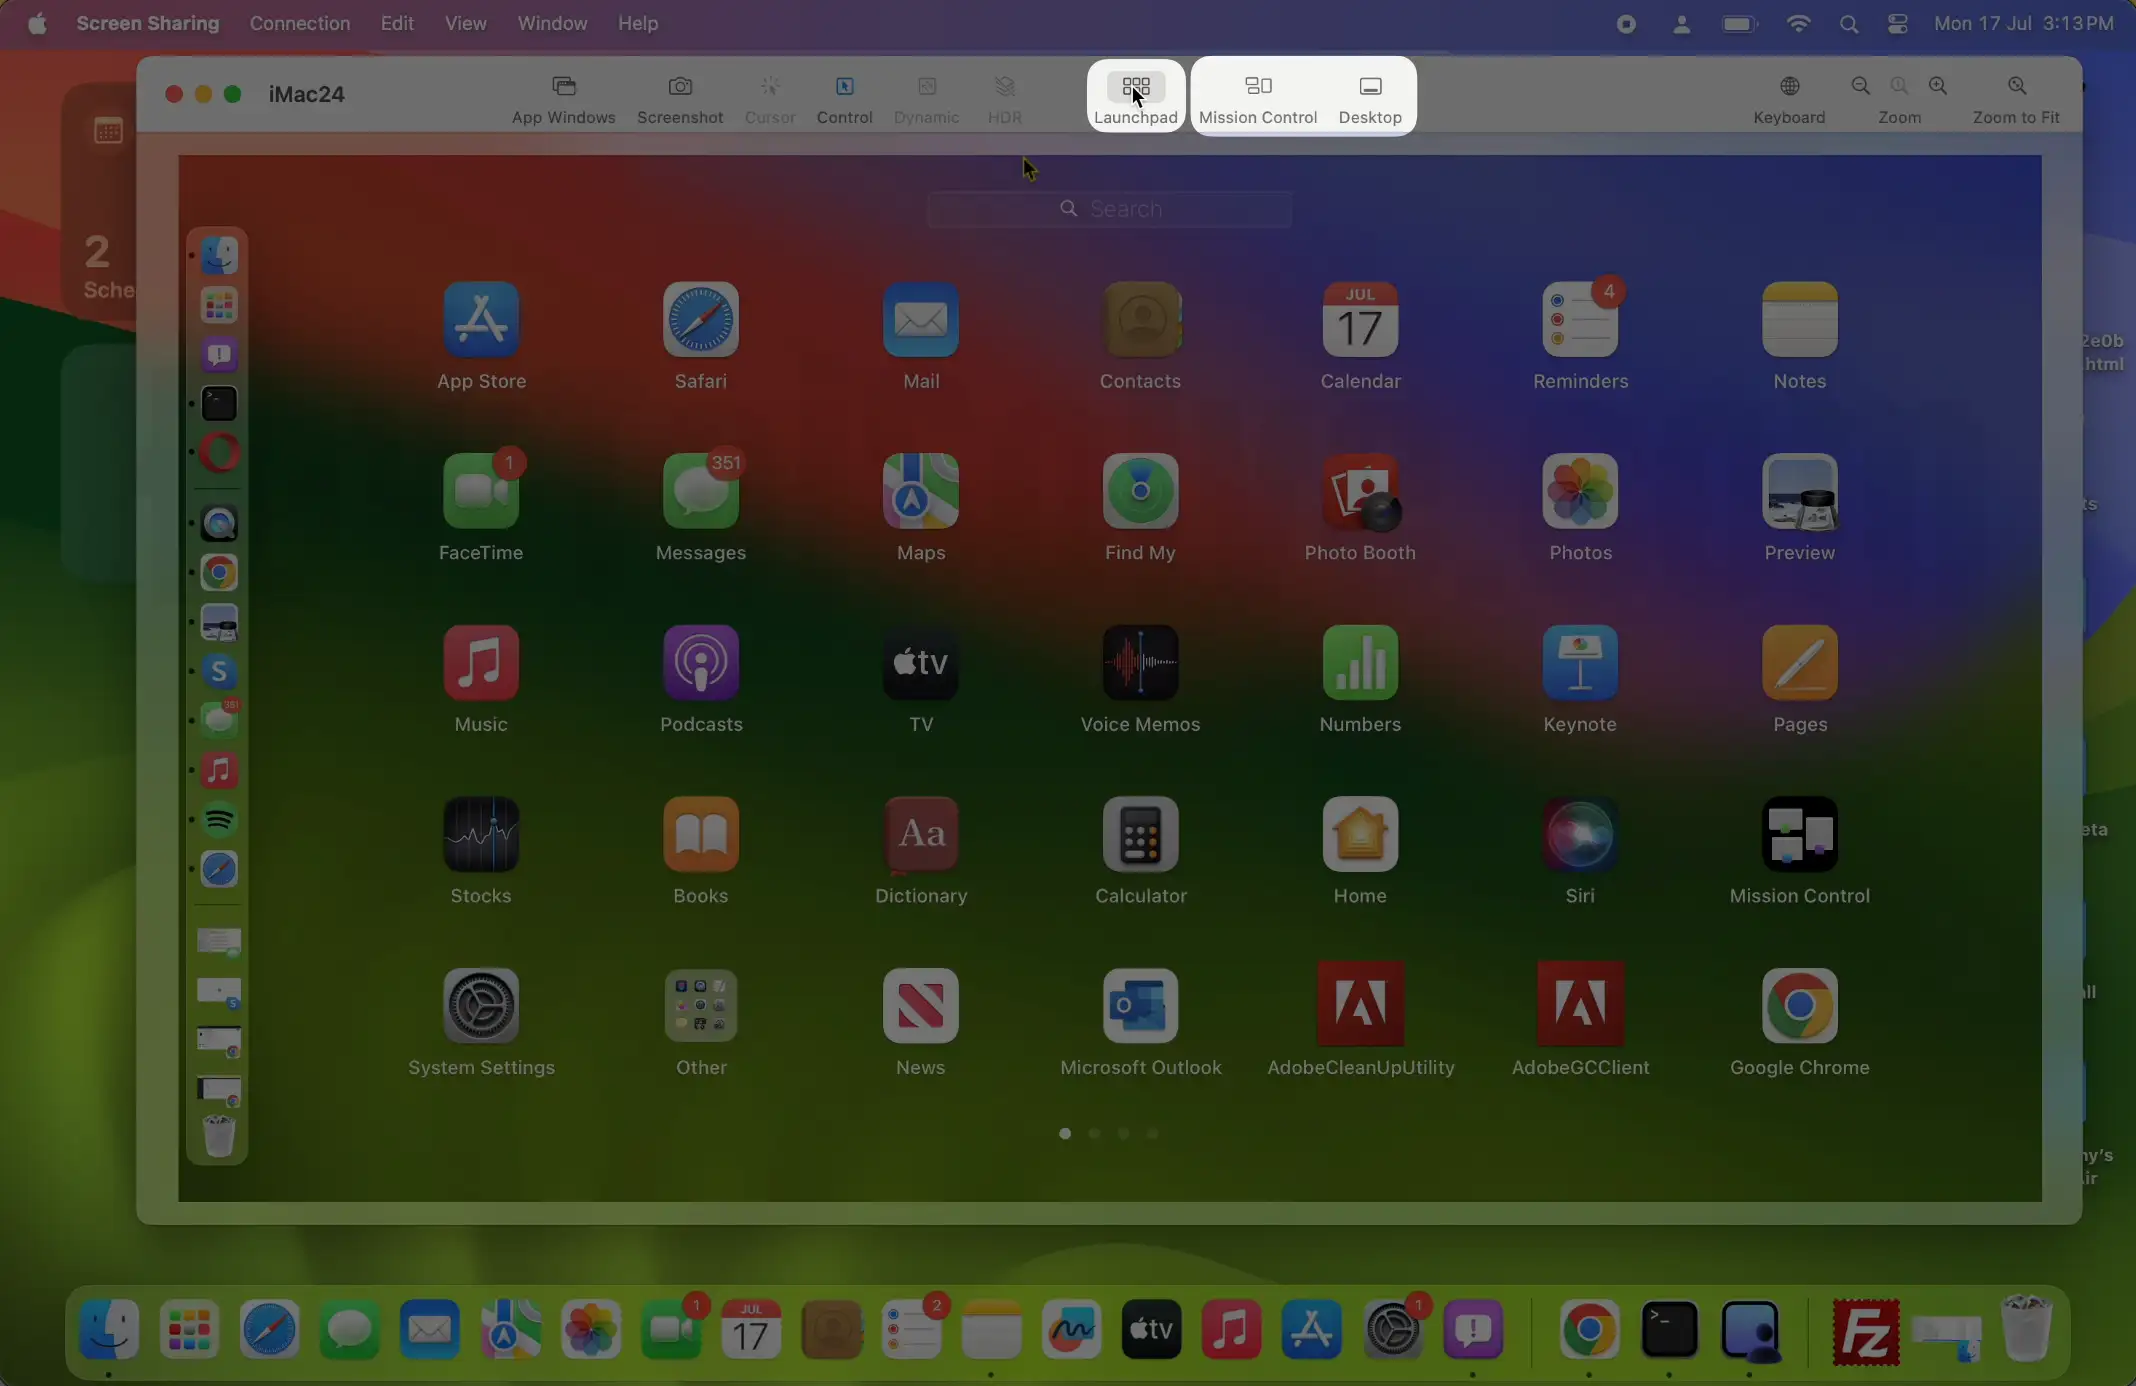 Launch Pad, Missing Control In Screen Sharing App on Mac